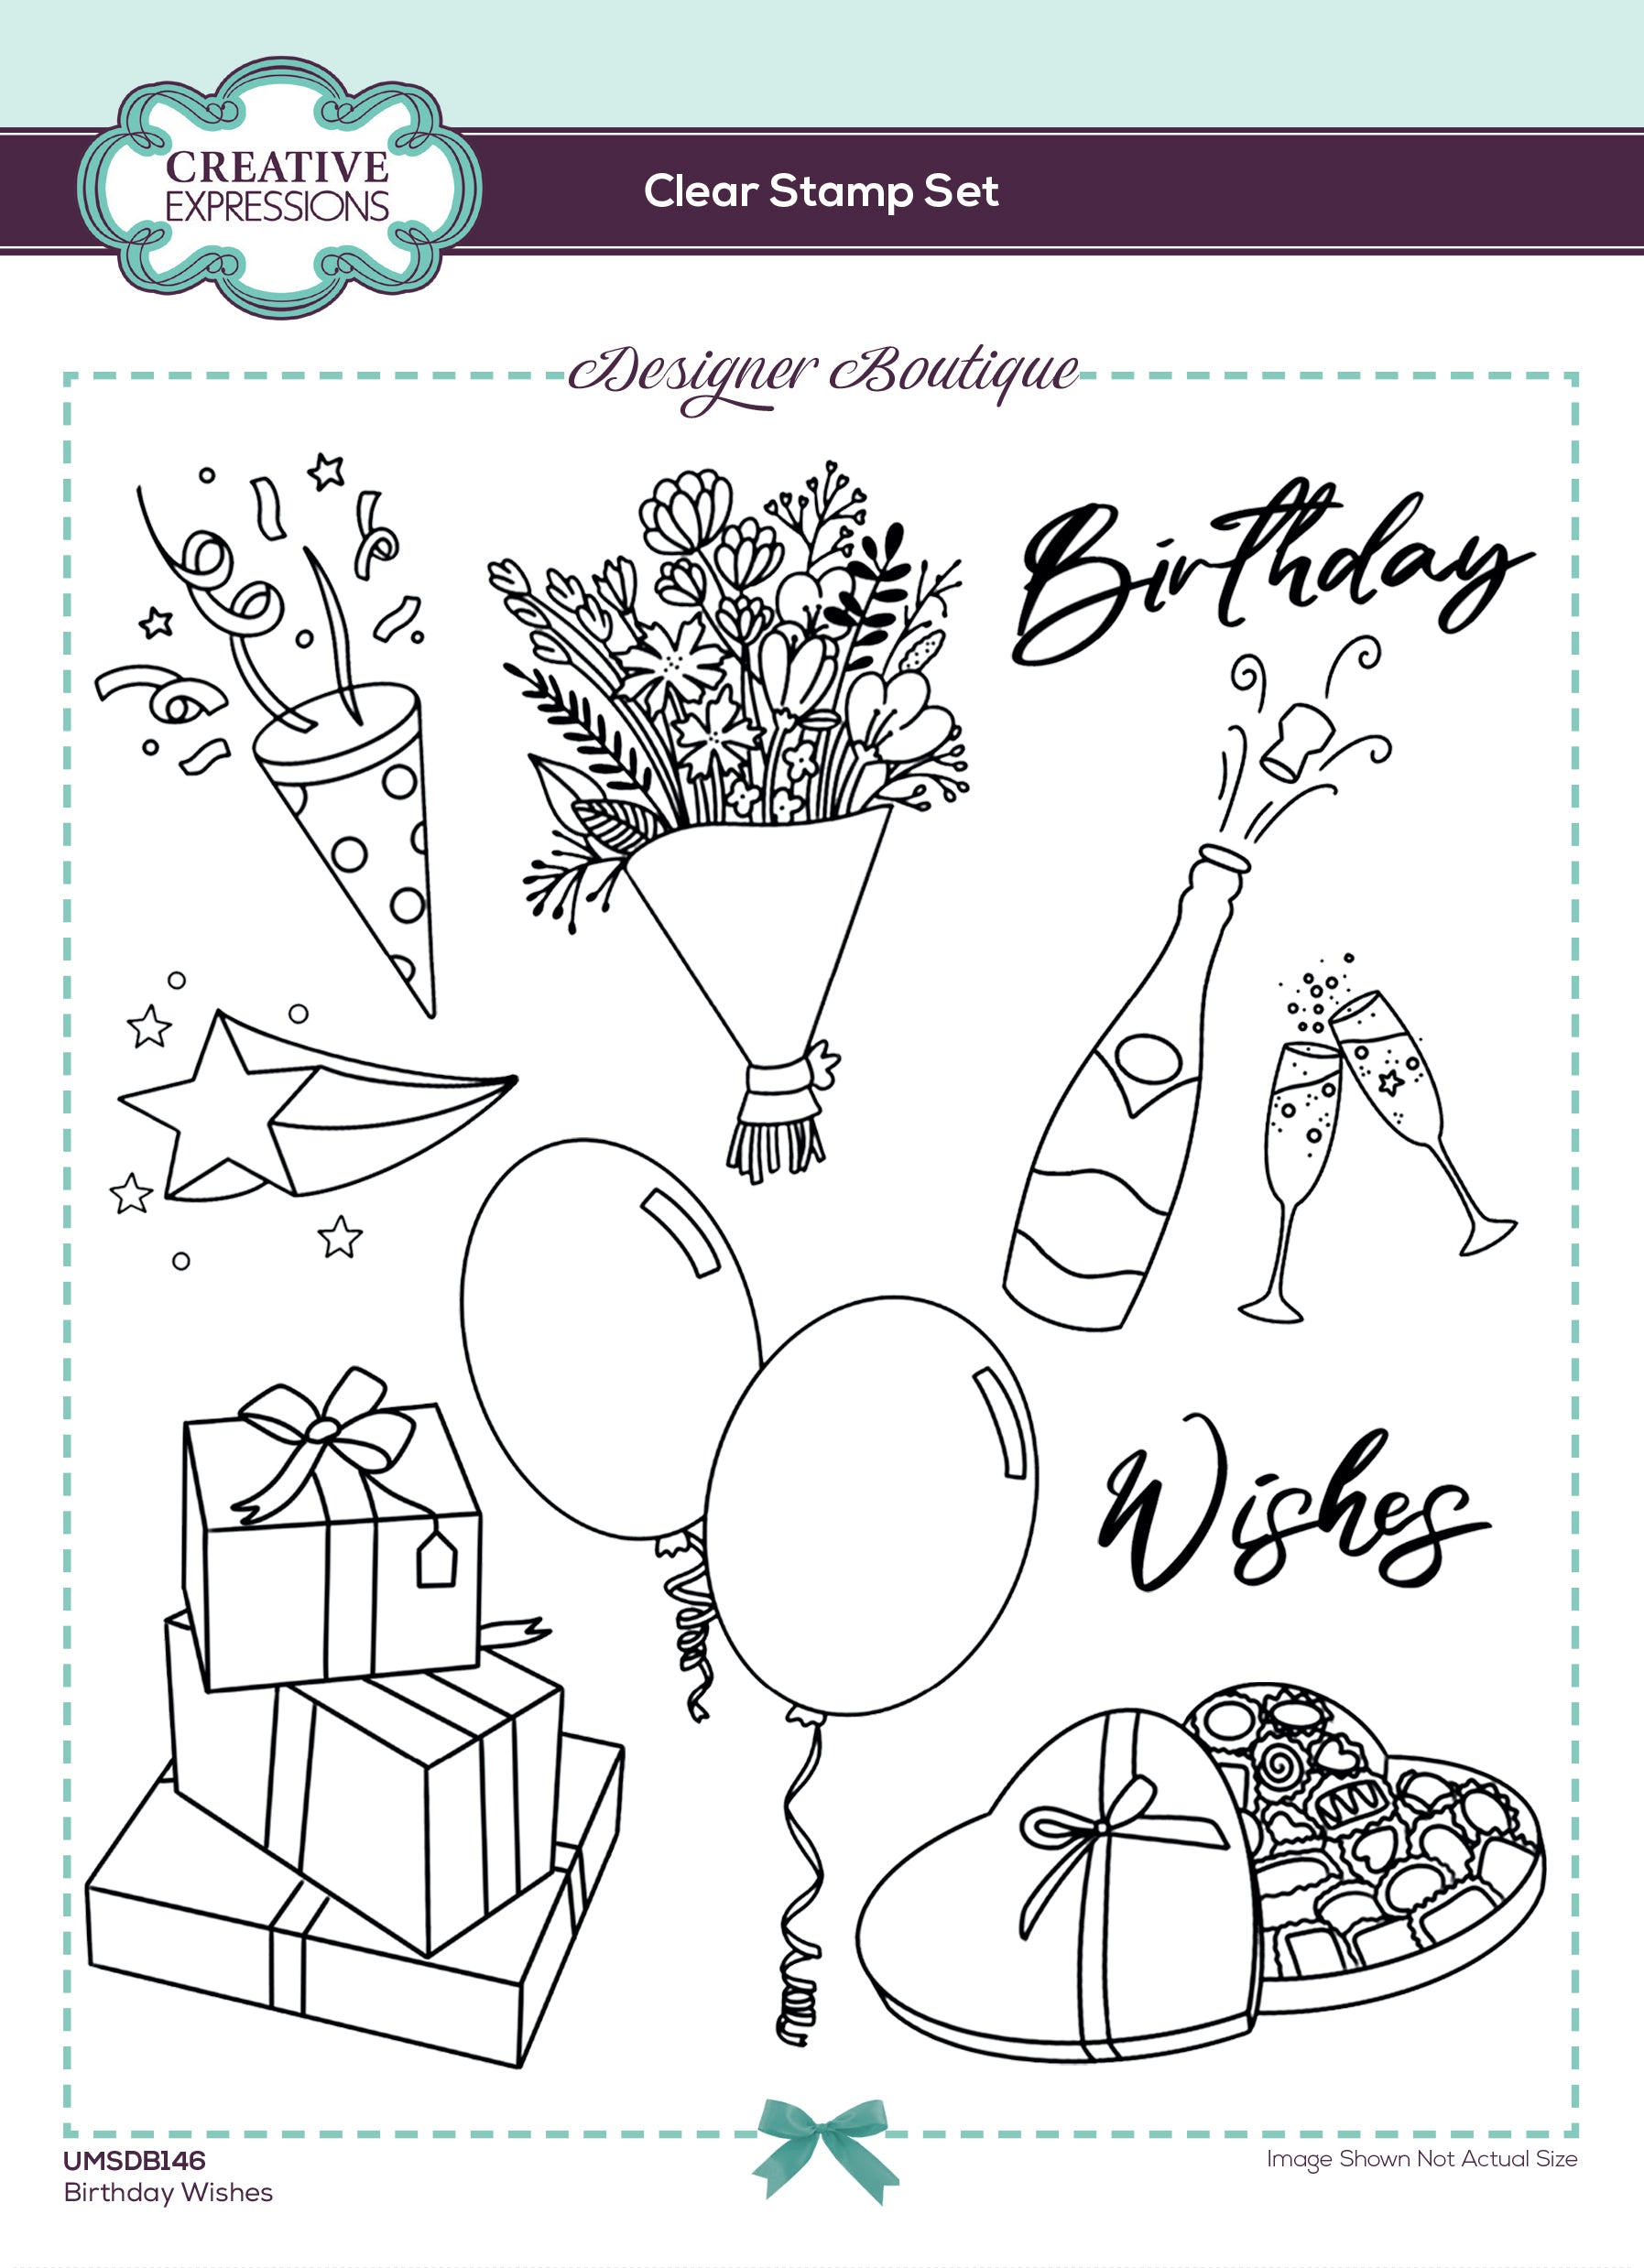 Creative Expressions Designer Boutique Birthday Wishes 6 in x 8 in Stamp Set